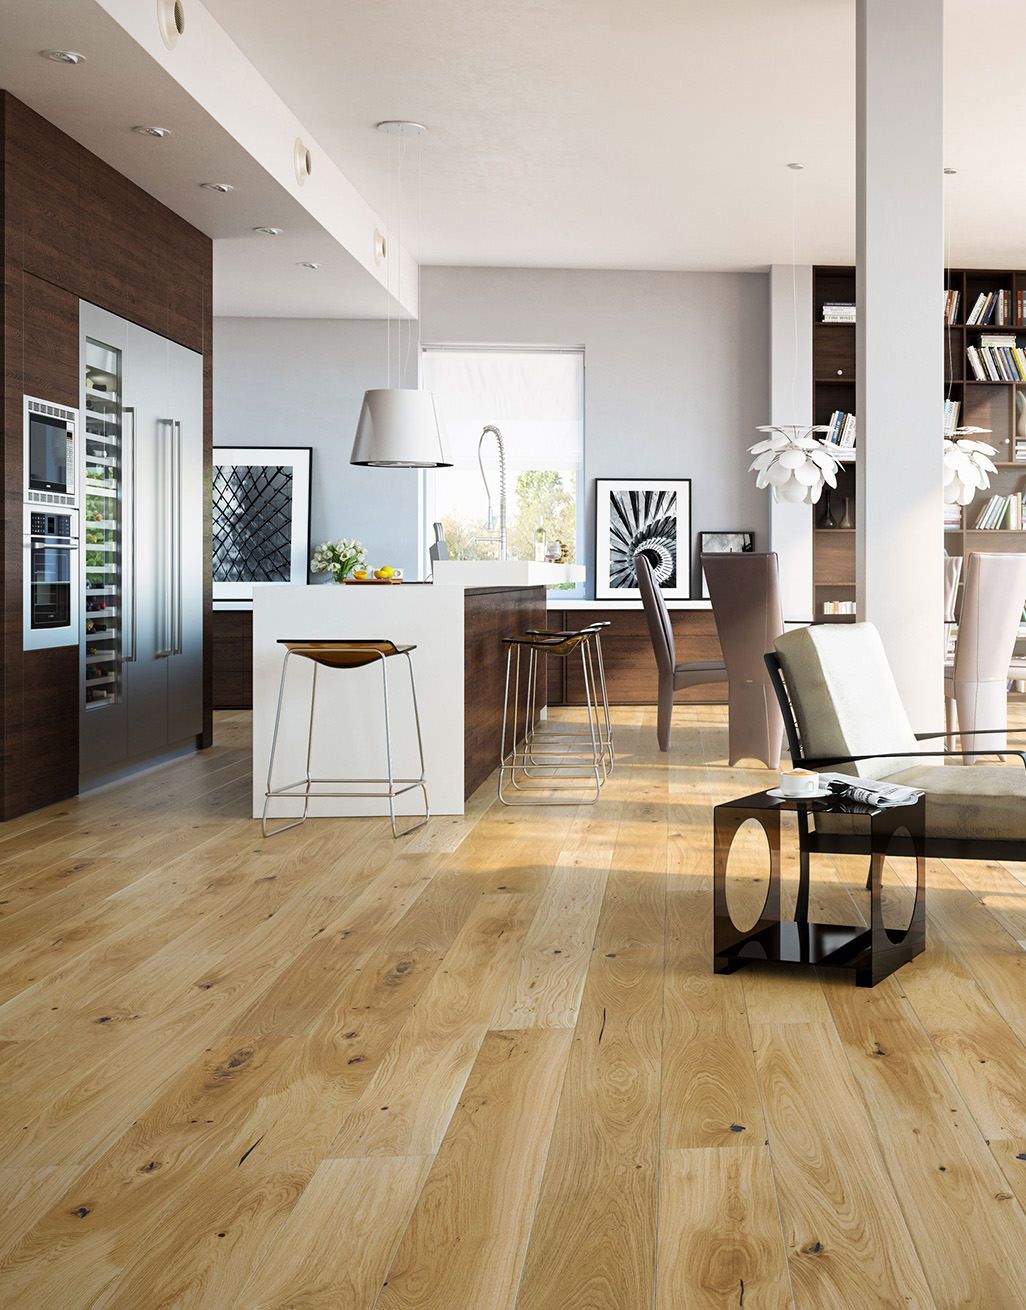 Carpenters Choice Natural 14mm x 155mm Lacquered Engineered Wood Flooring 4